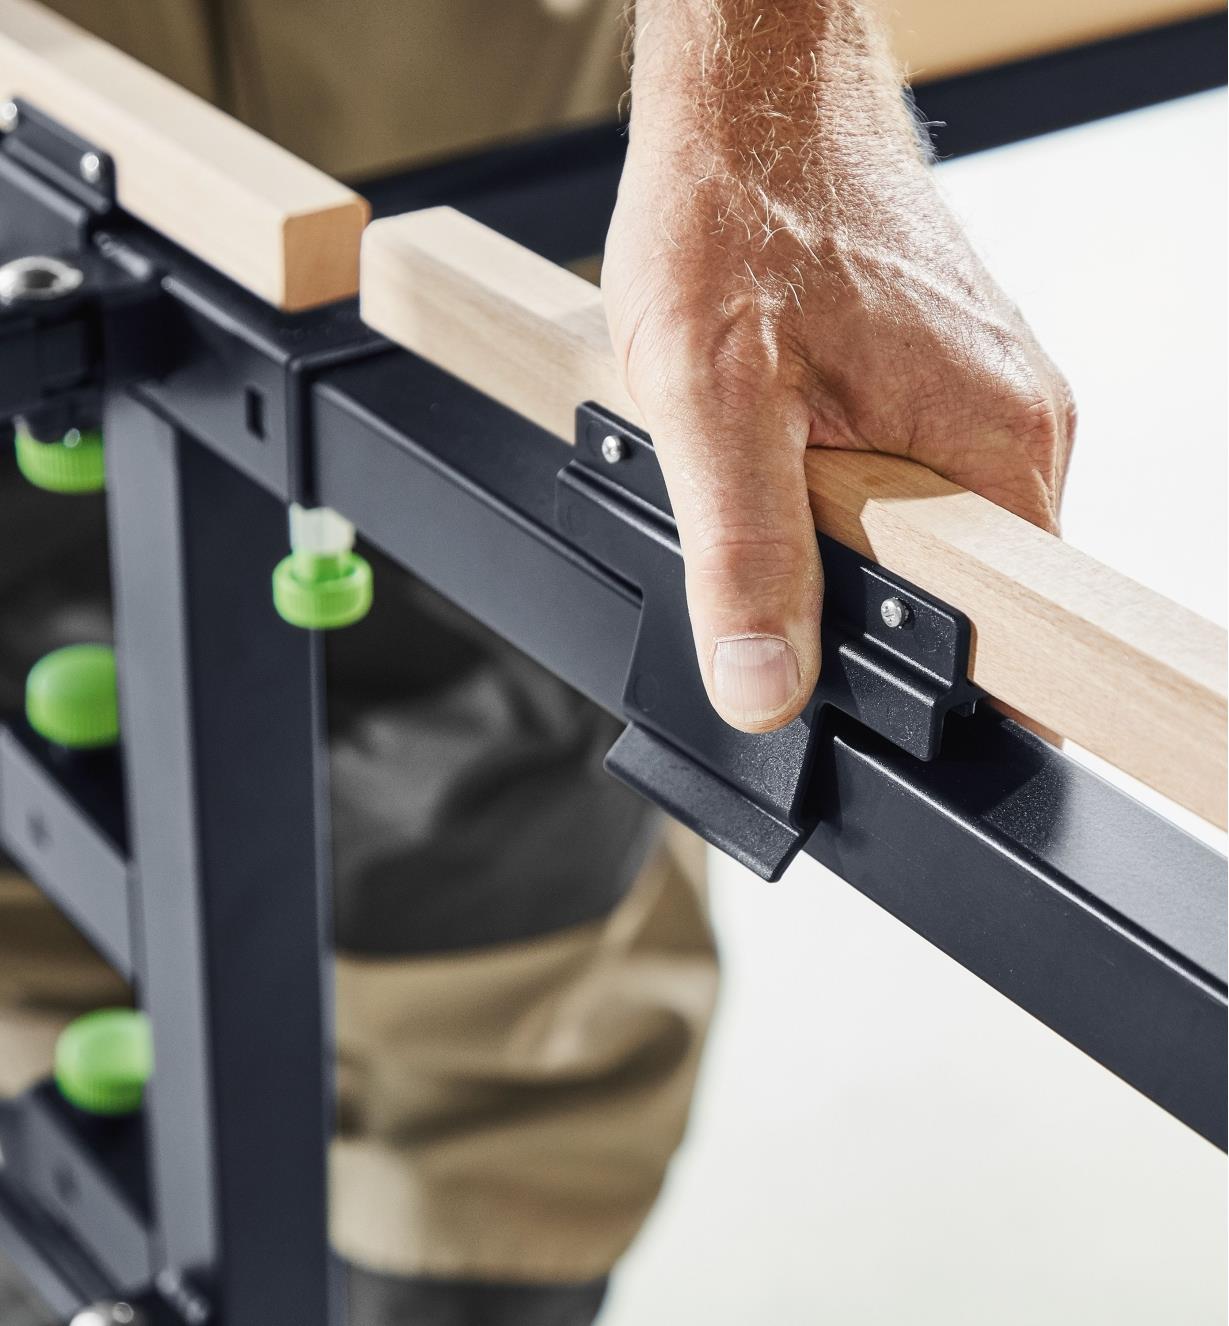 Clipping a wooden support onto the frame of the mobile sawing table